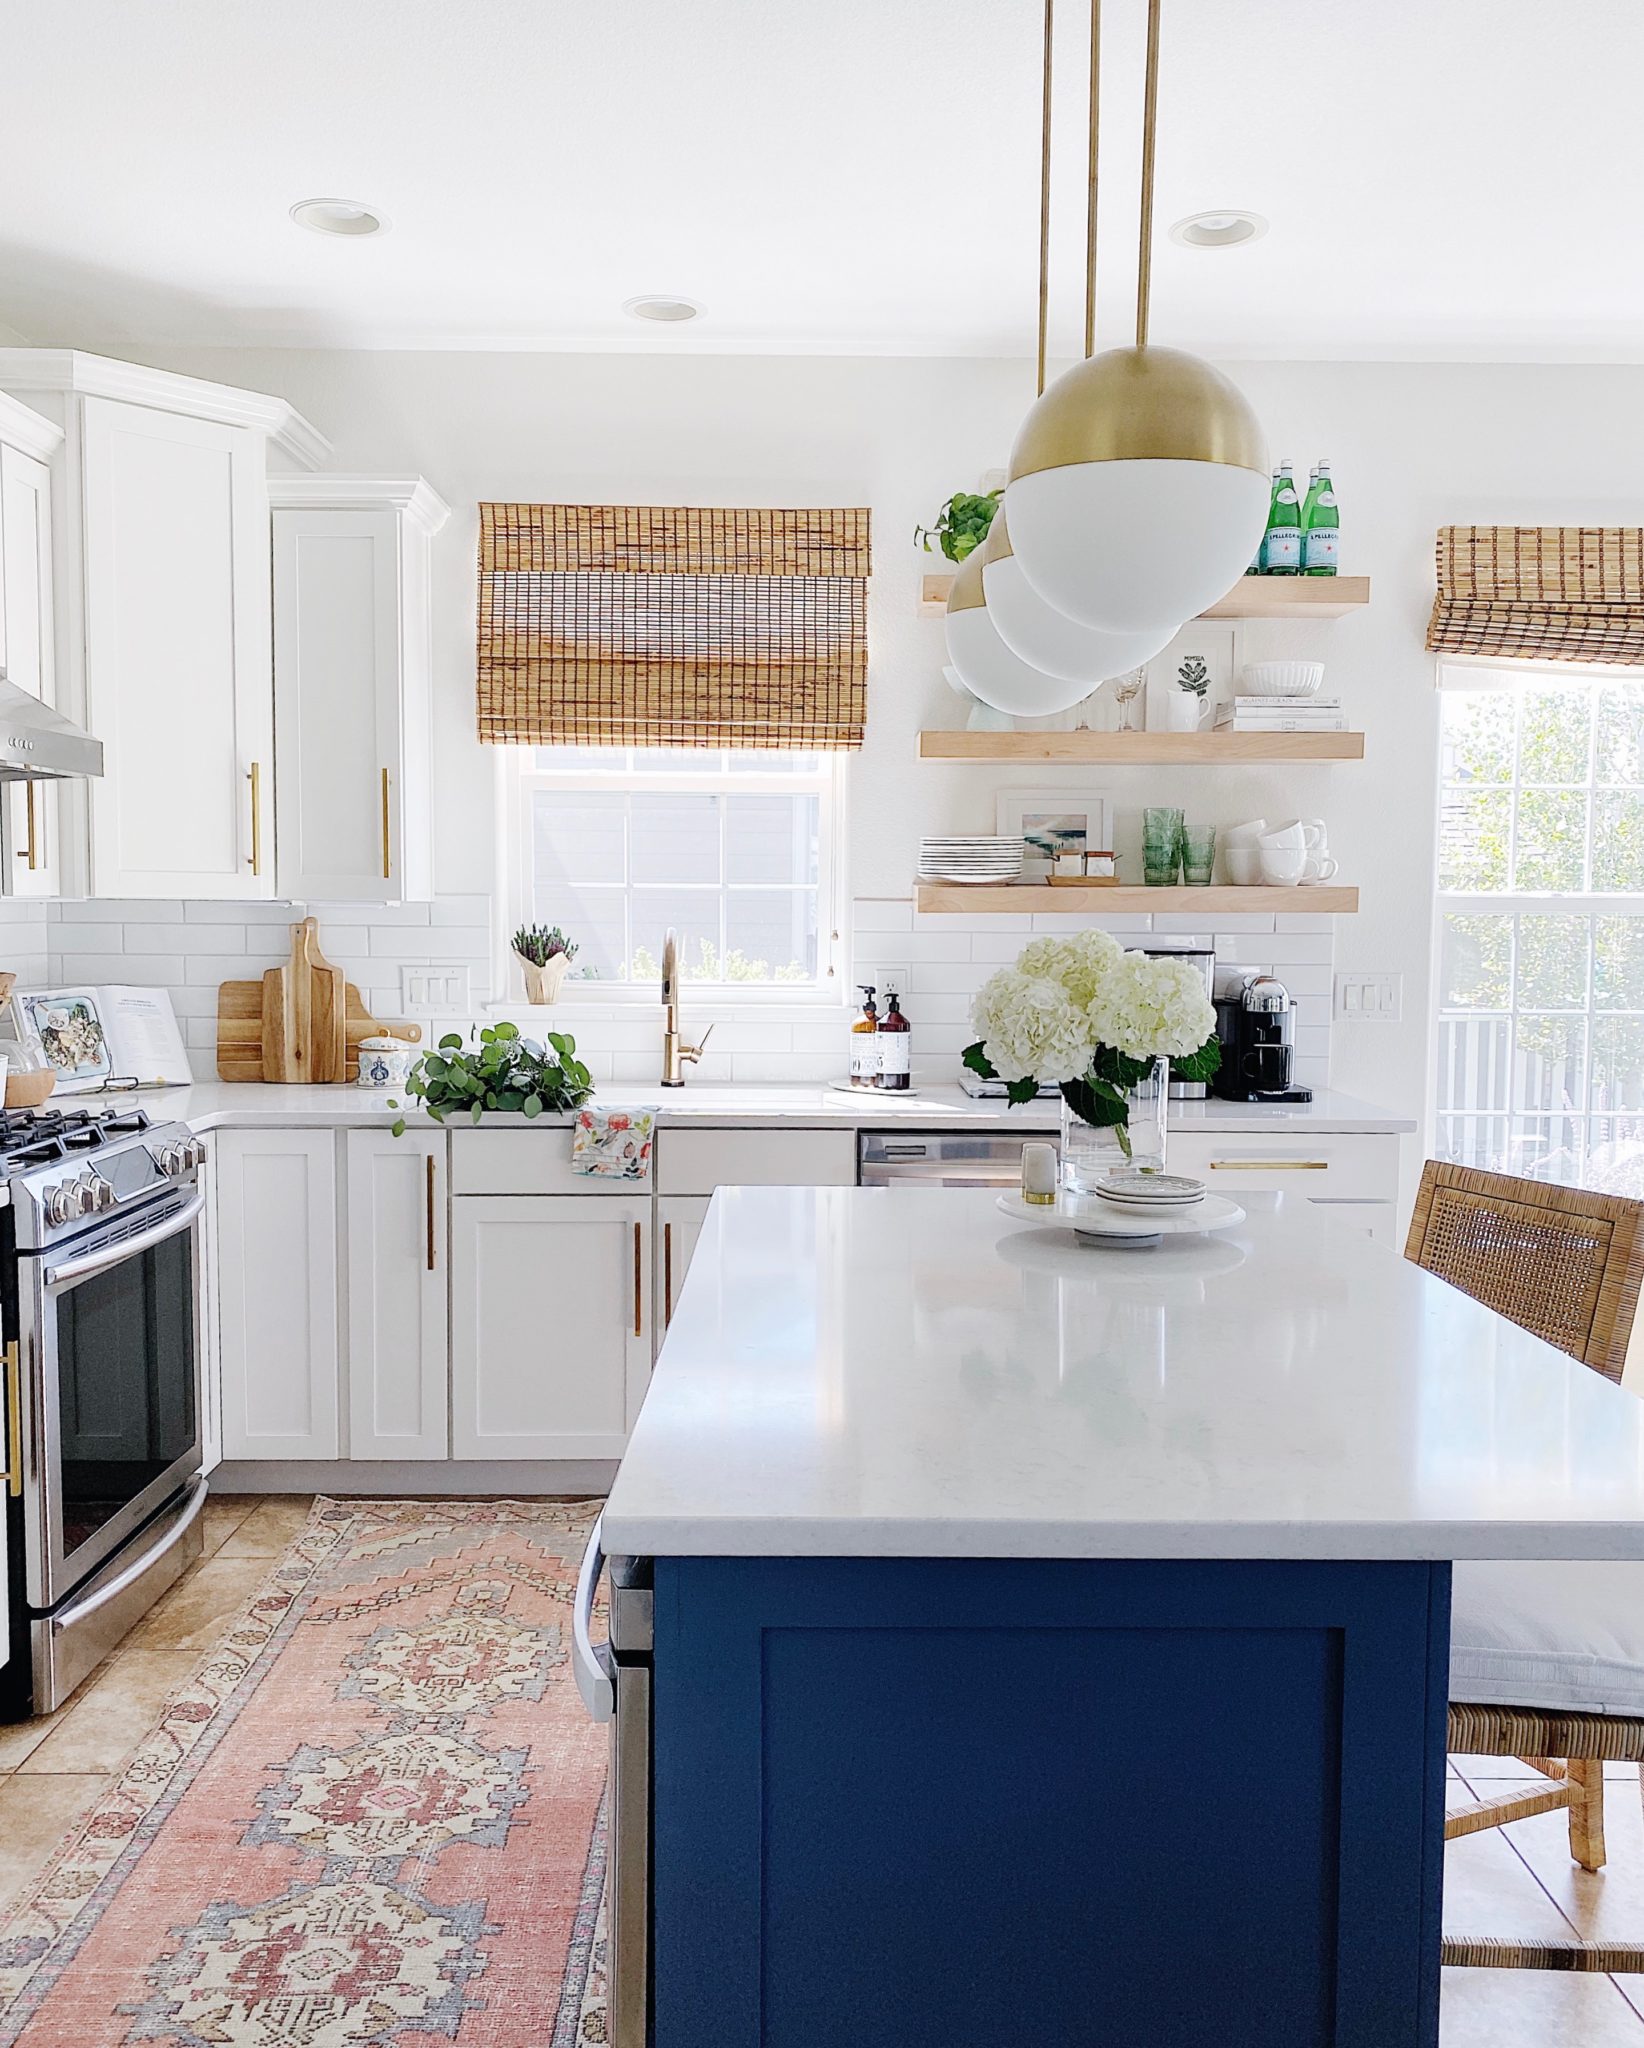 Adding Blue and White to your Kitchen Decor